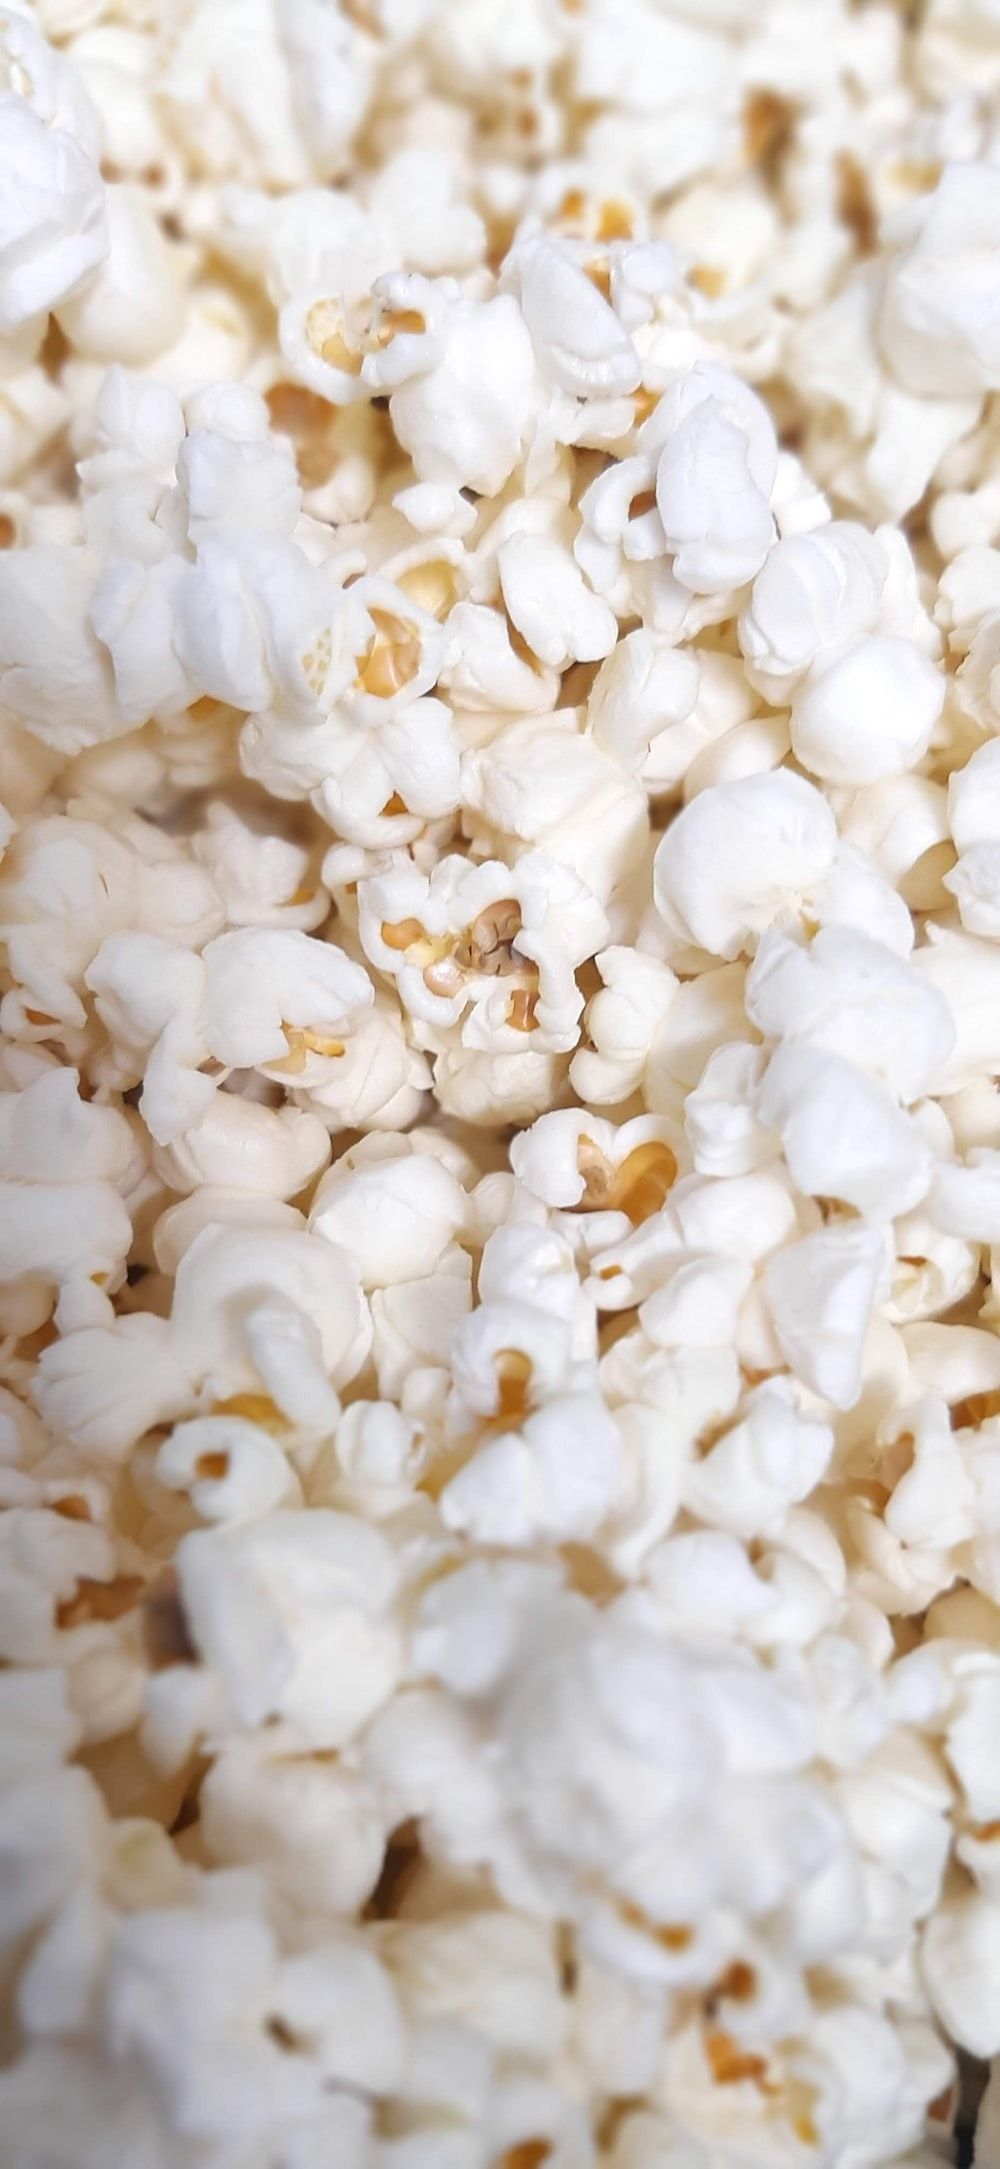 Popcorn Picture. Download Free Image